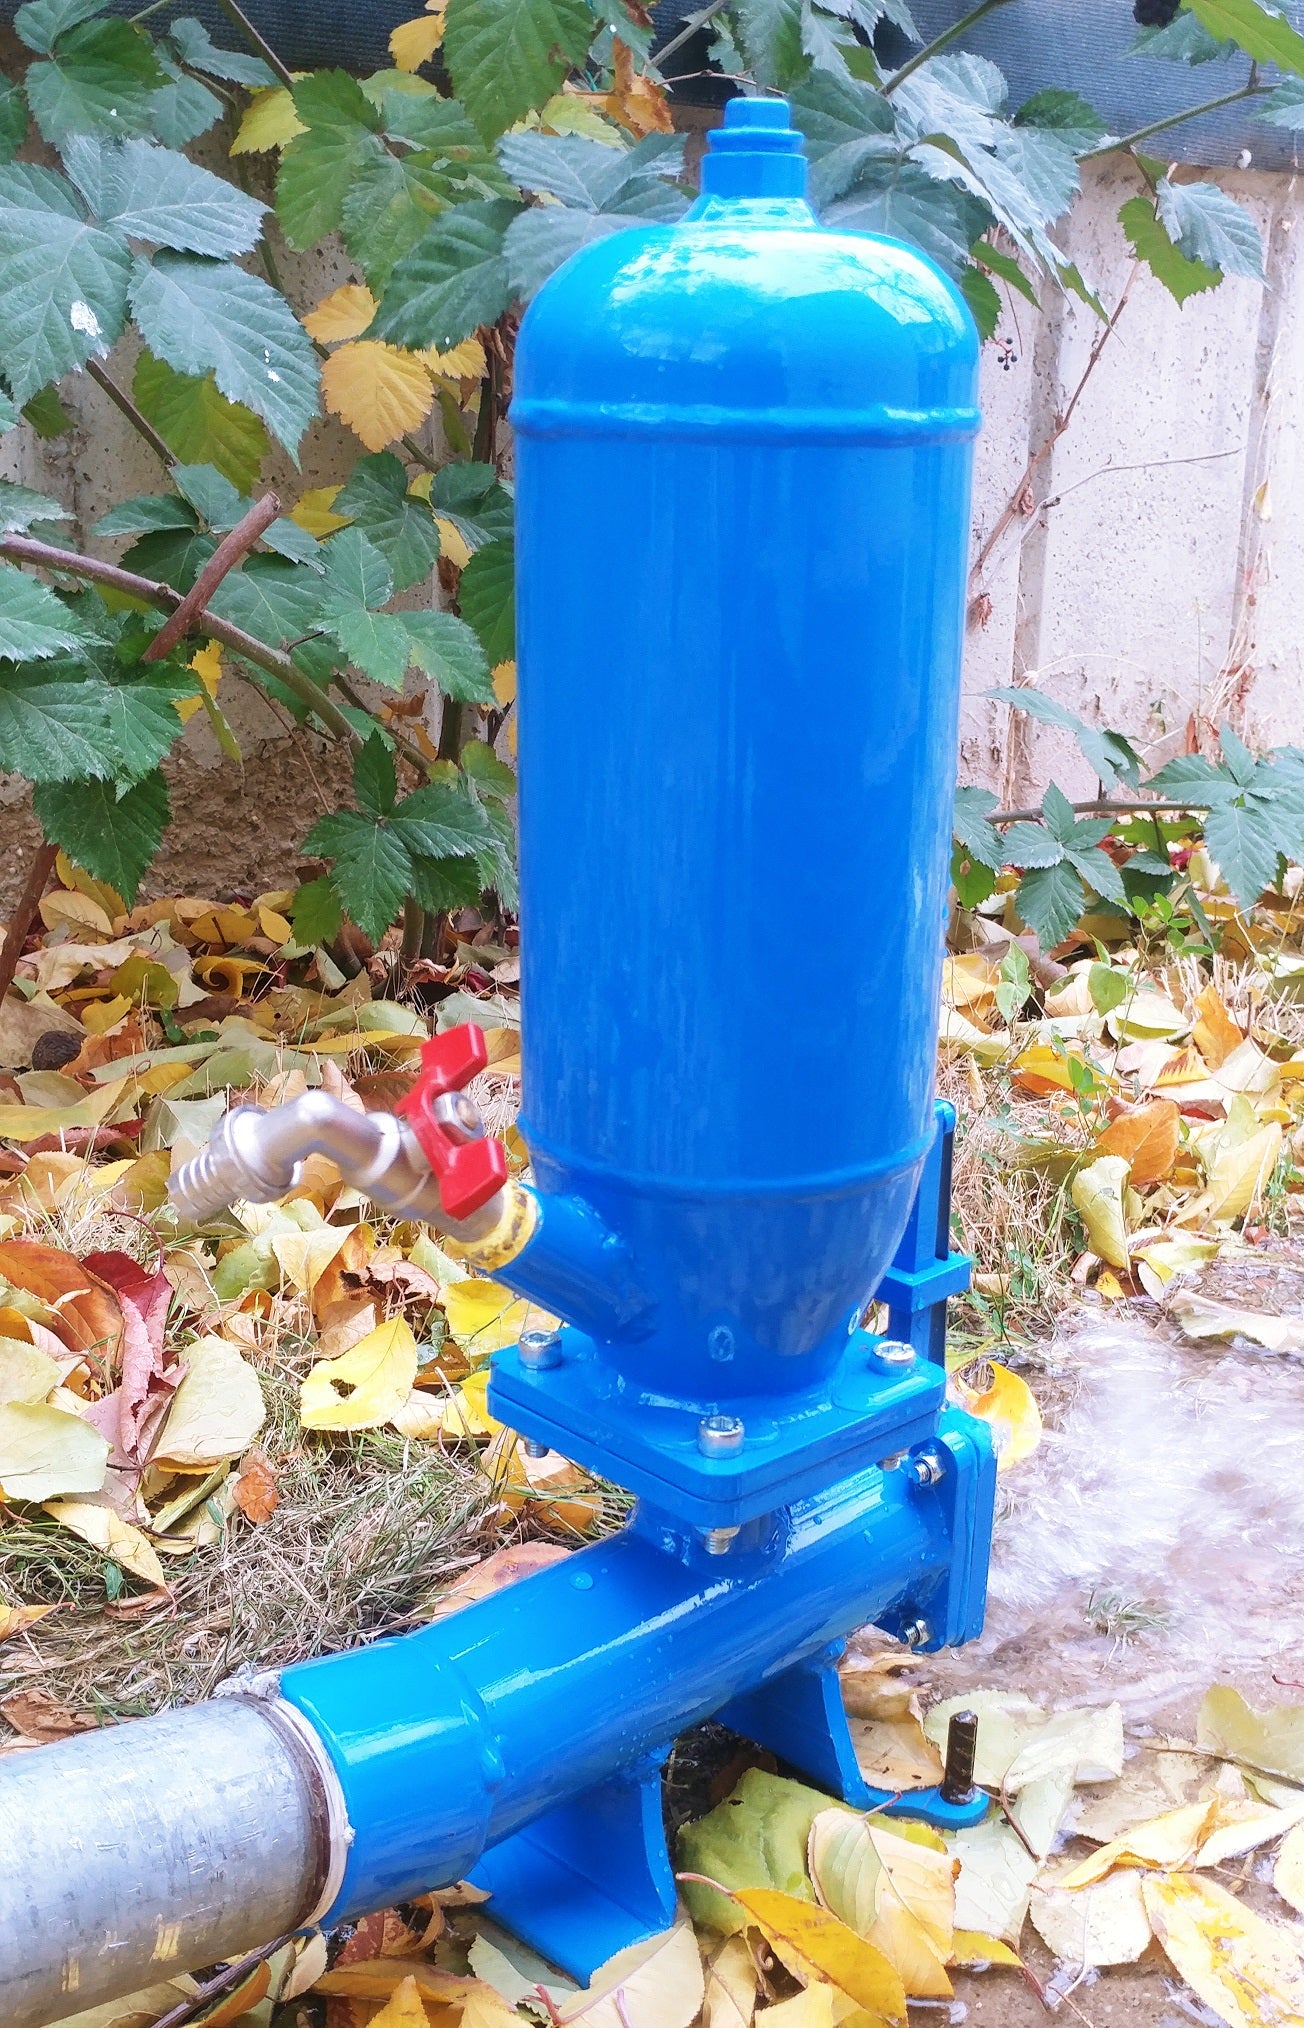 fx21 Hydraulic Ram Irrigation Water Pump With Free Water Energy Drive